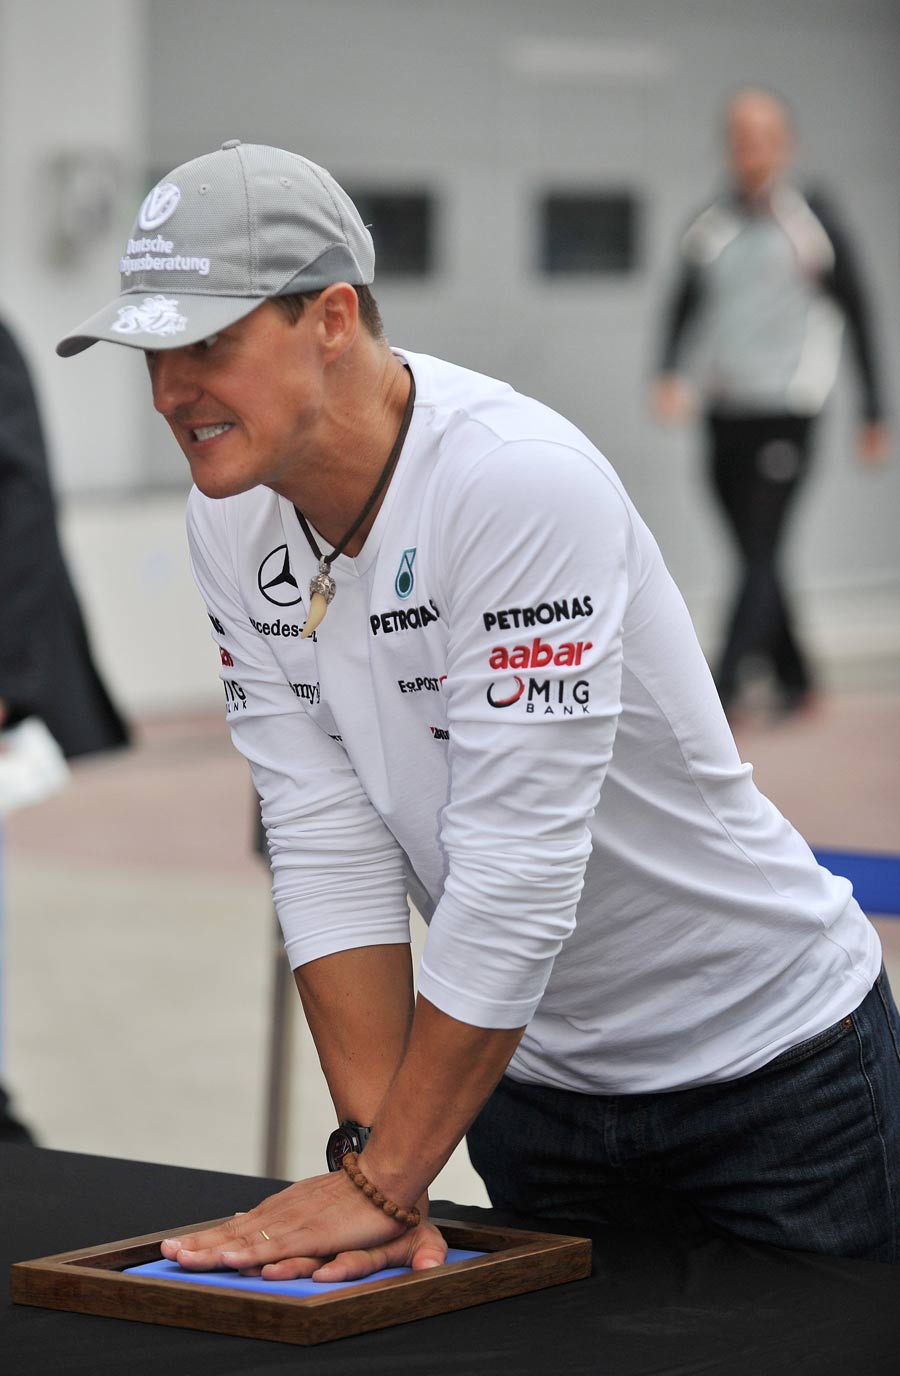 Michael Schumacher presses his hand into a mould for a permanent exhibition to recognize the first participants of the Korean Grand Prix 